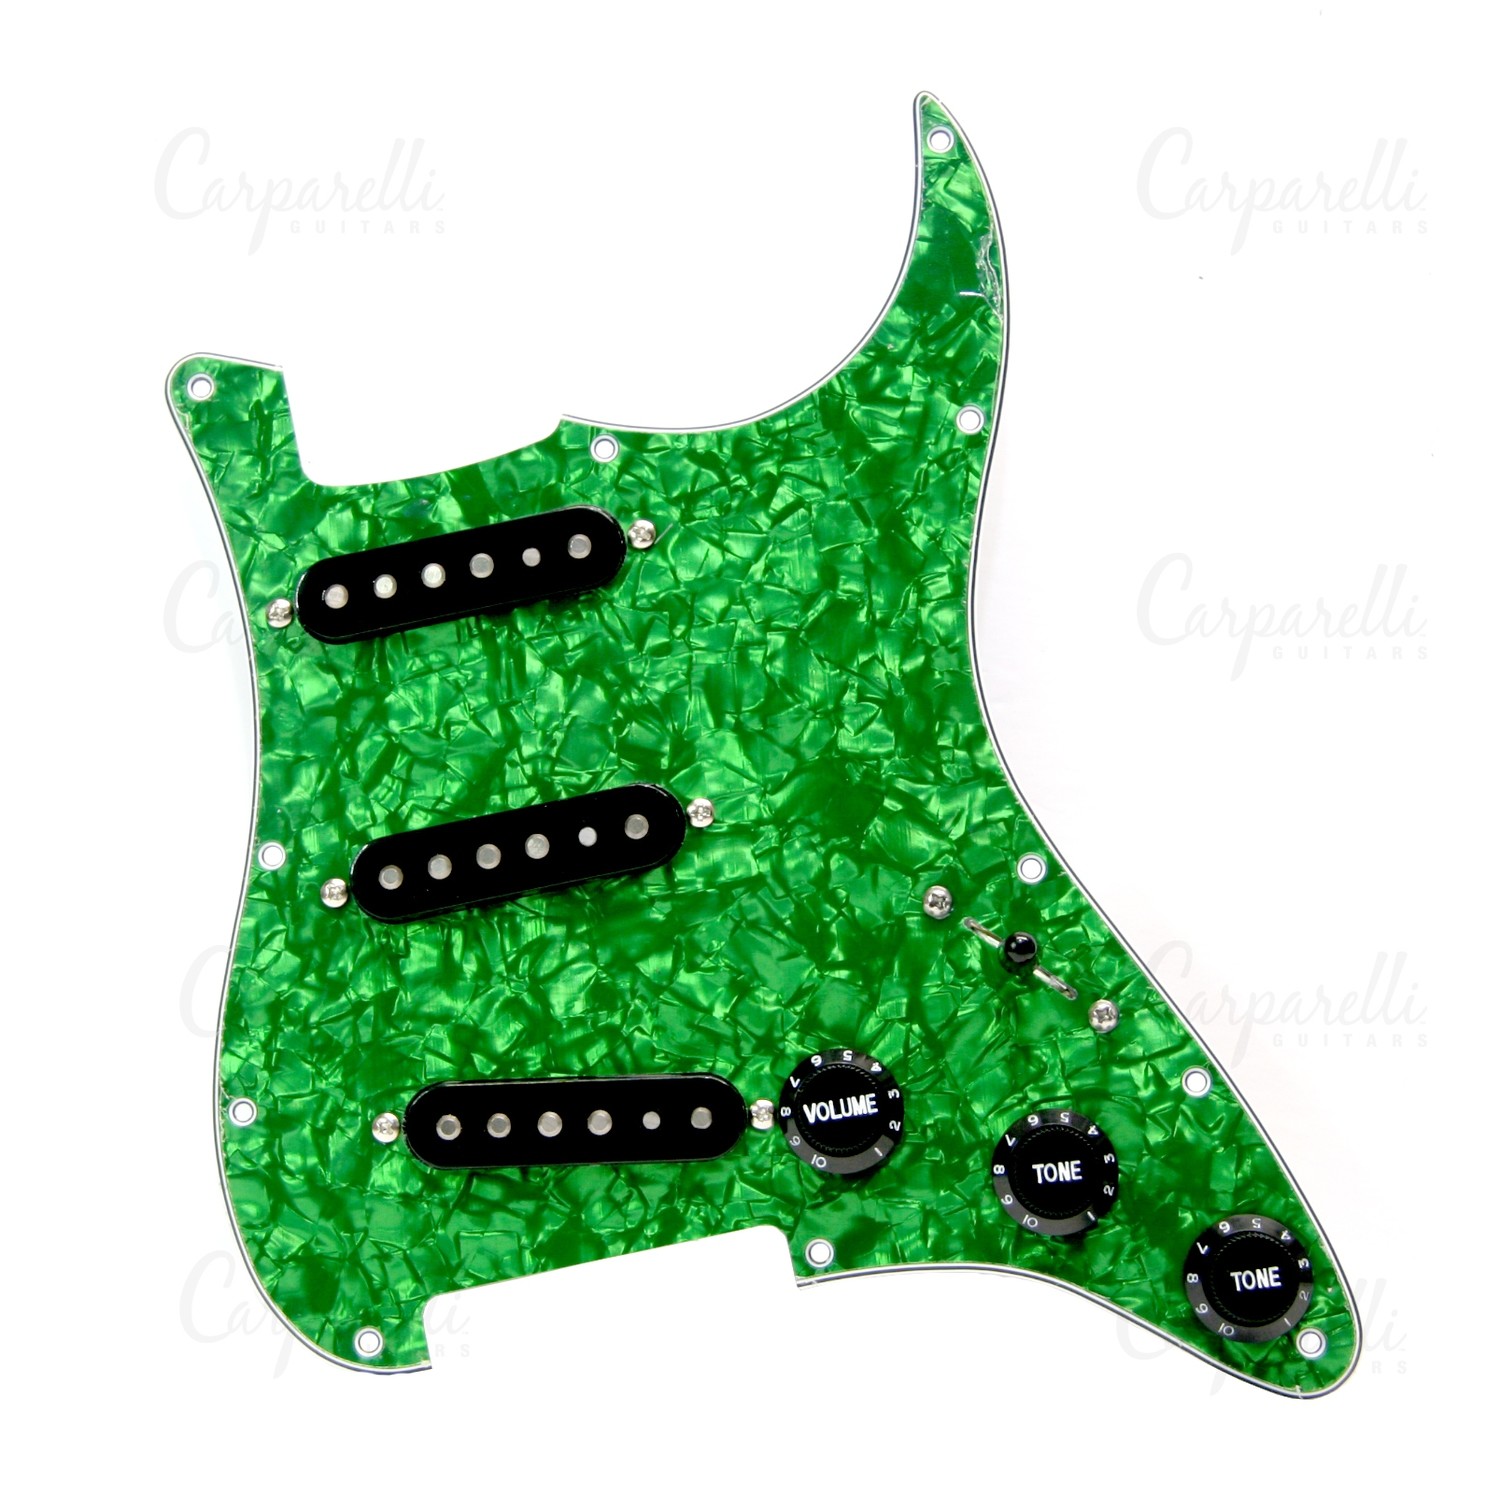 Carparelli Pre-Wired SSS Green Pearloid for Stratocaster®